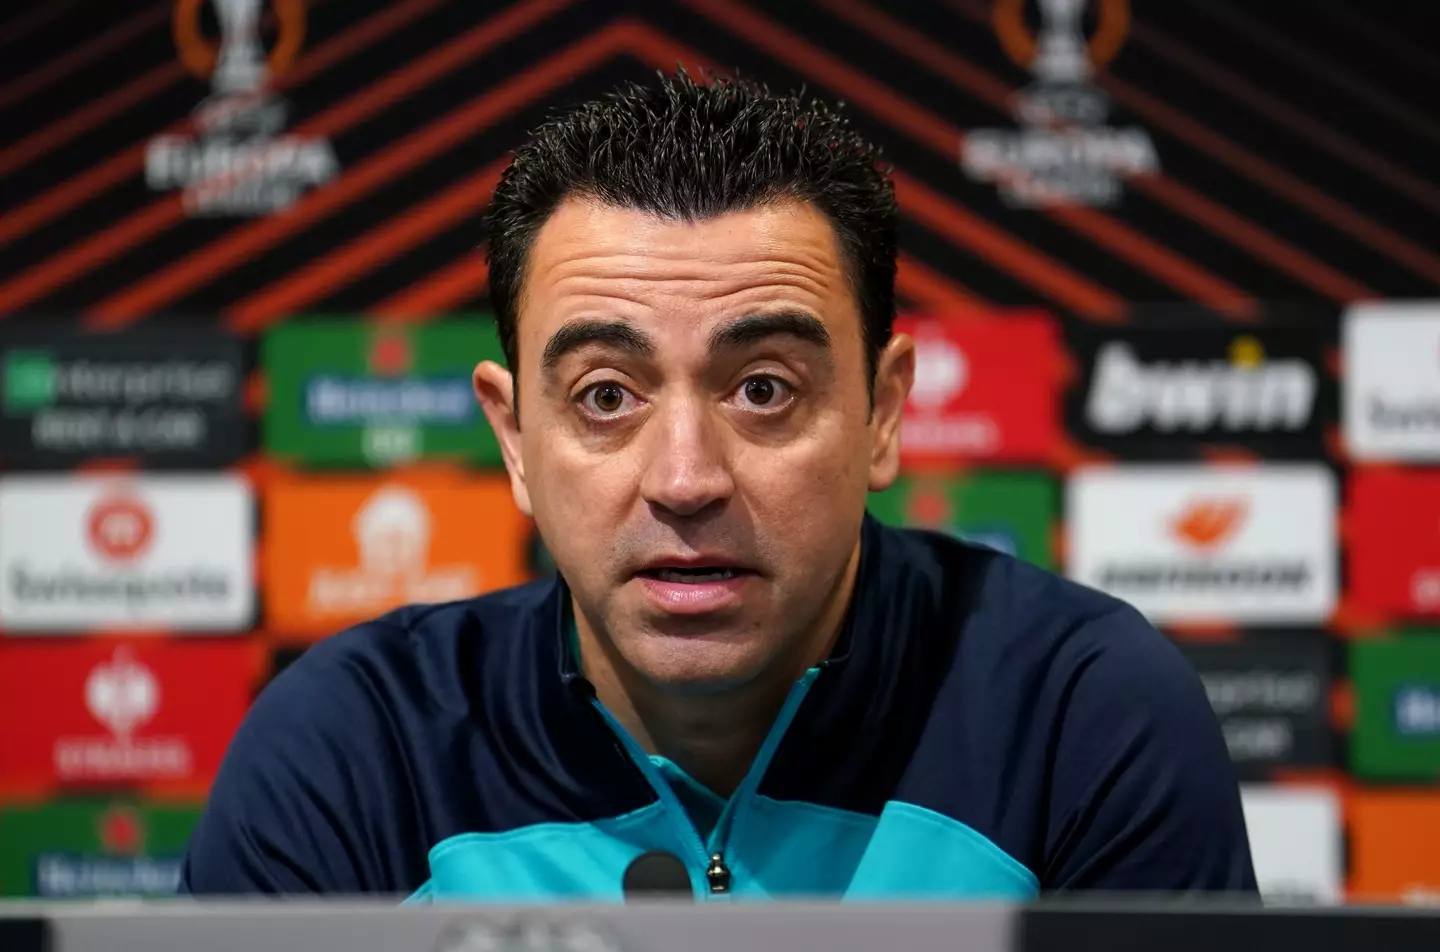 Xavi was asked about the treatment from Athletic Bilbao fans during his press conference. (